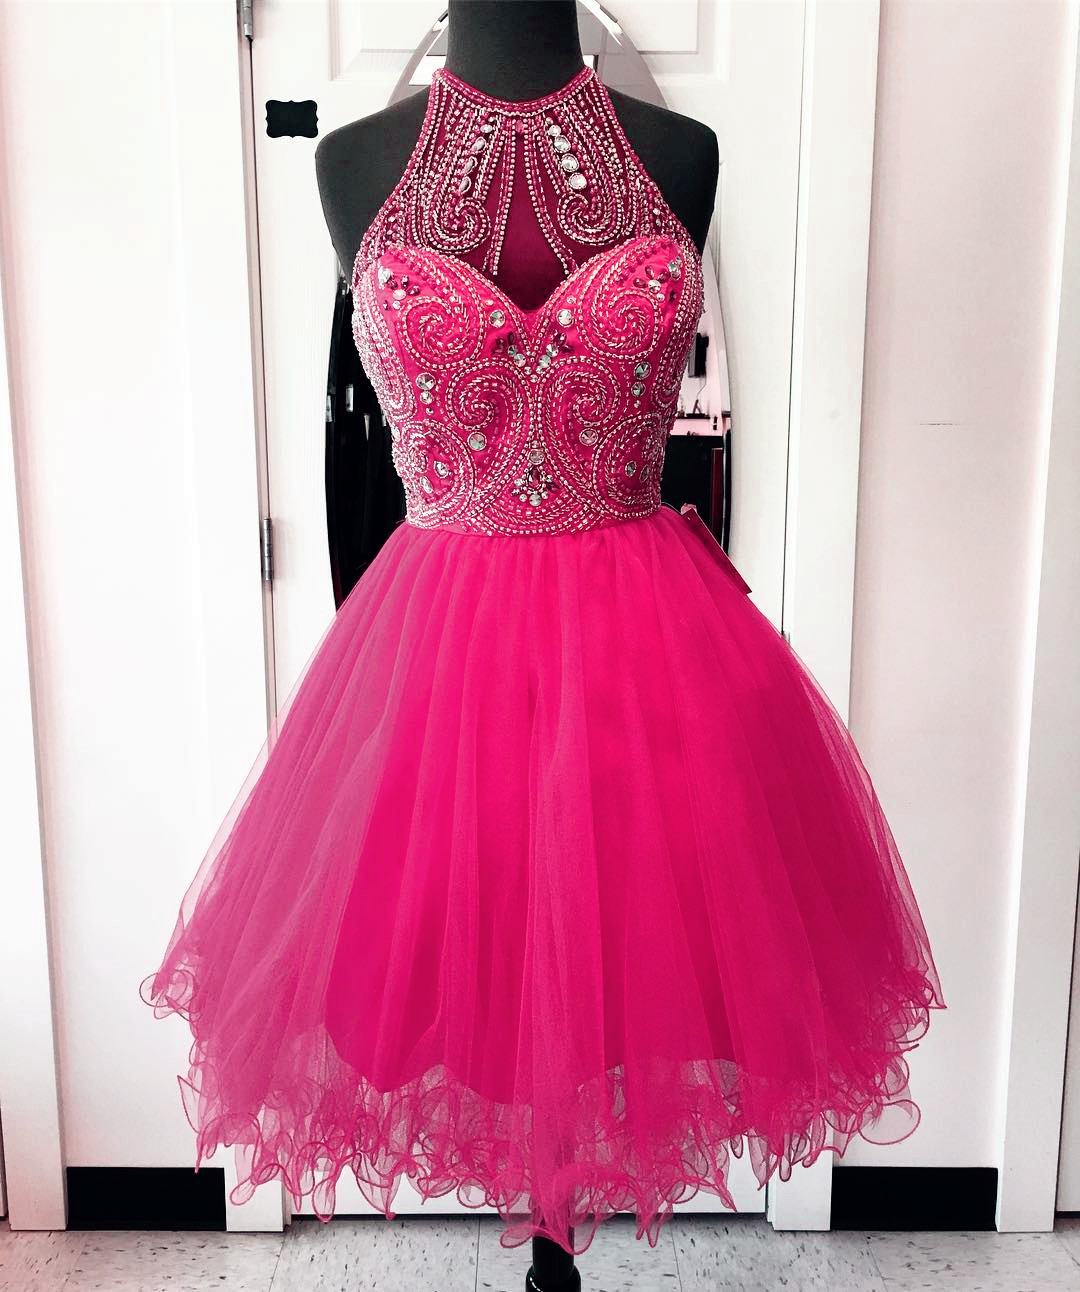 Homecoming Dresses,high Neck Homecoming Dresses, Pink Prom Dresses,chic Party Dress,women's Cocktail Dress